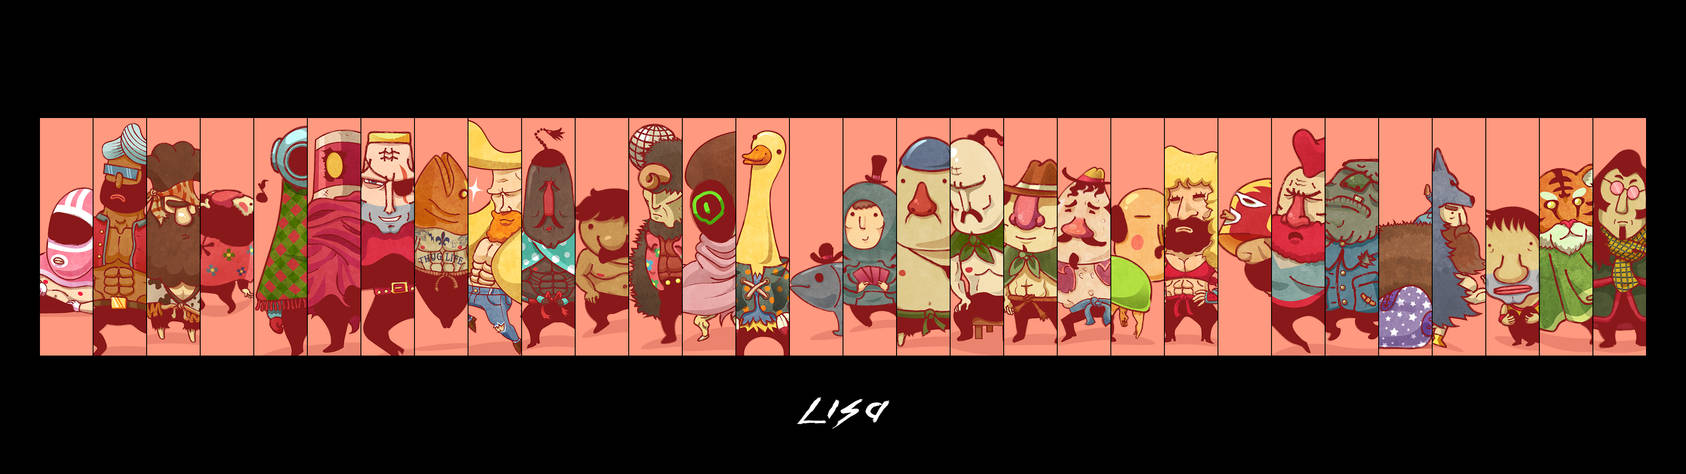 LISA: The Painful RPG - Wallpaper